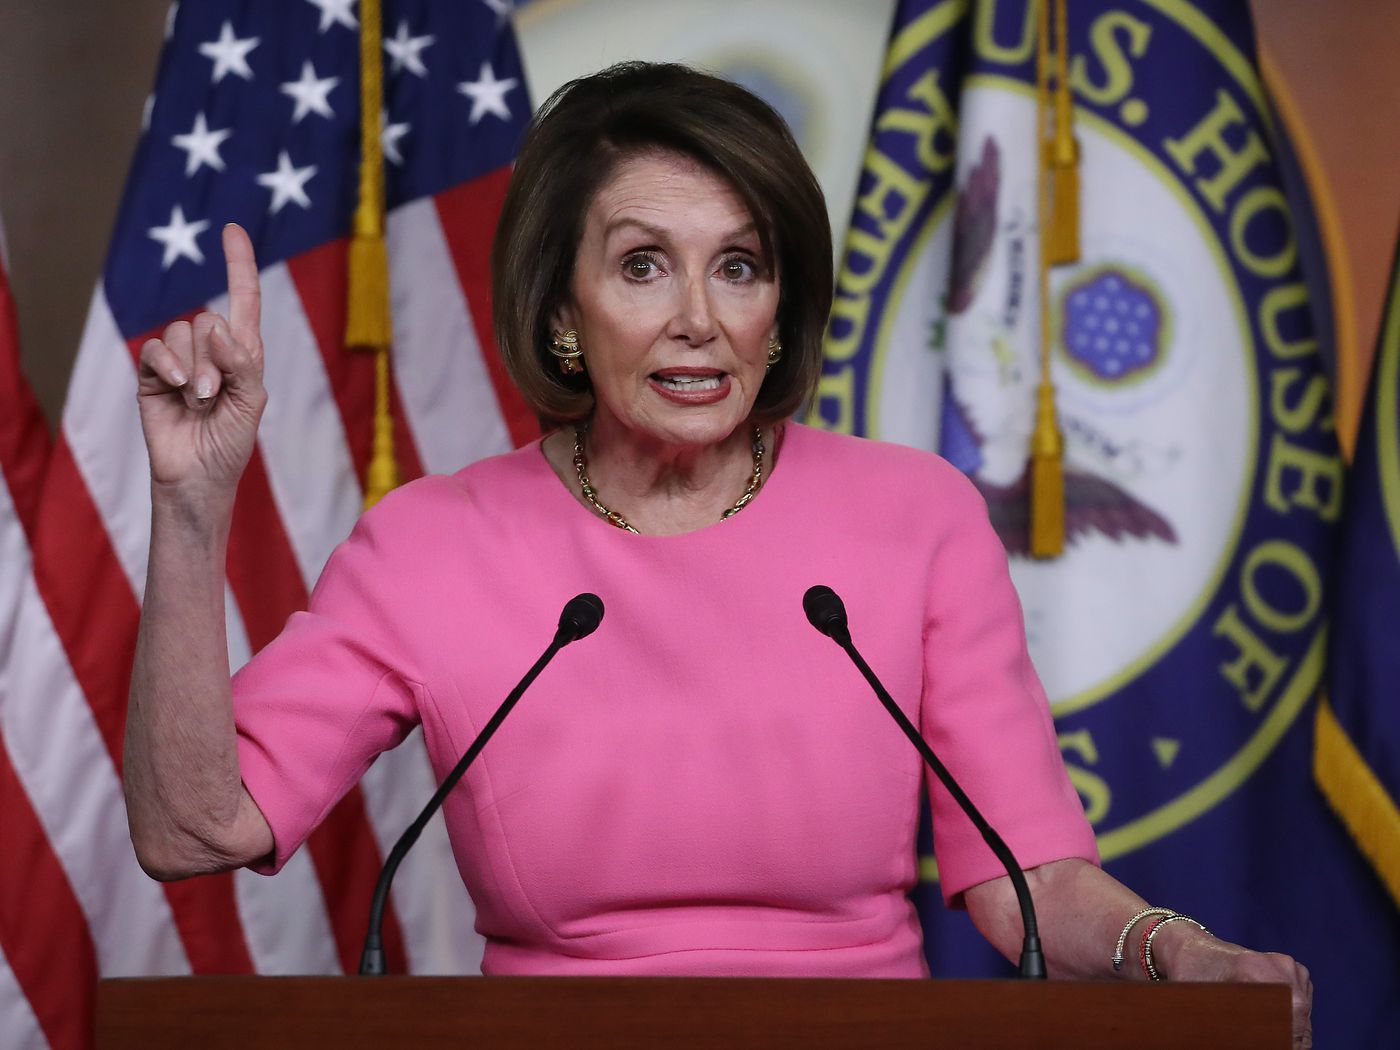 Facebook won't take down a doctored video of Nancy Pelosi going viral